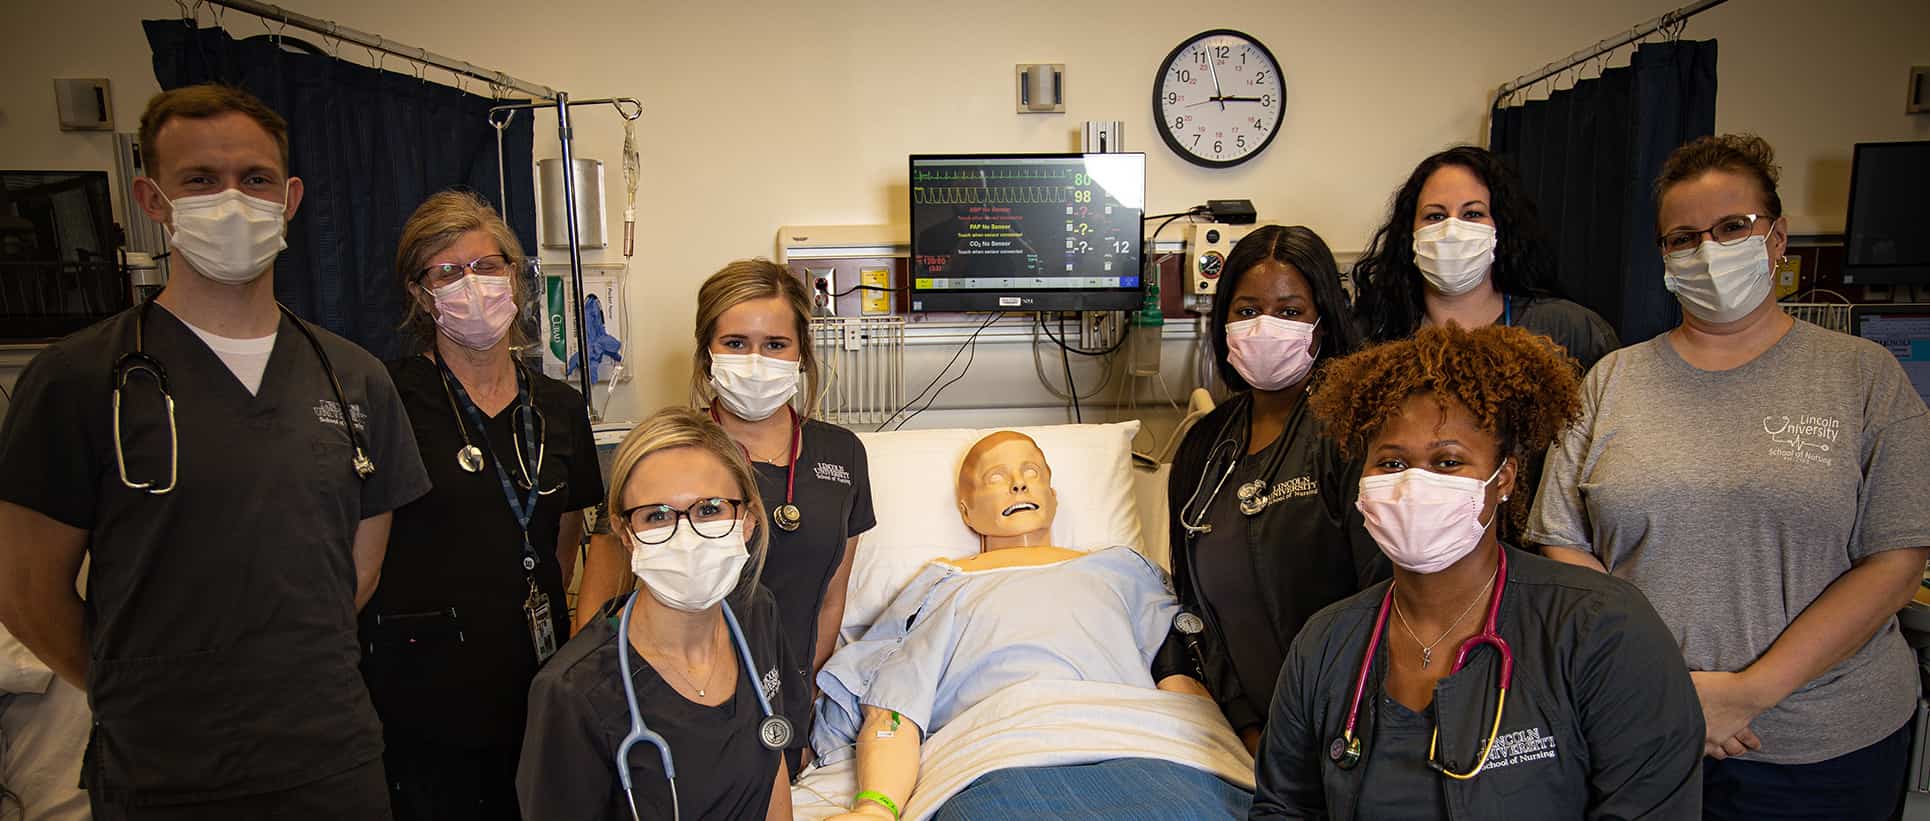 Nursing Faculty and Staff | Lincoln University of Missouri